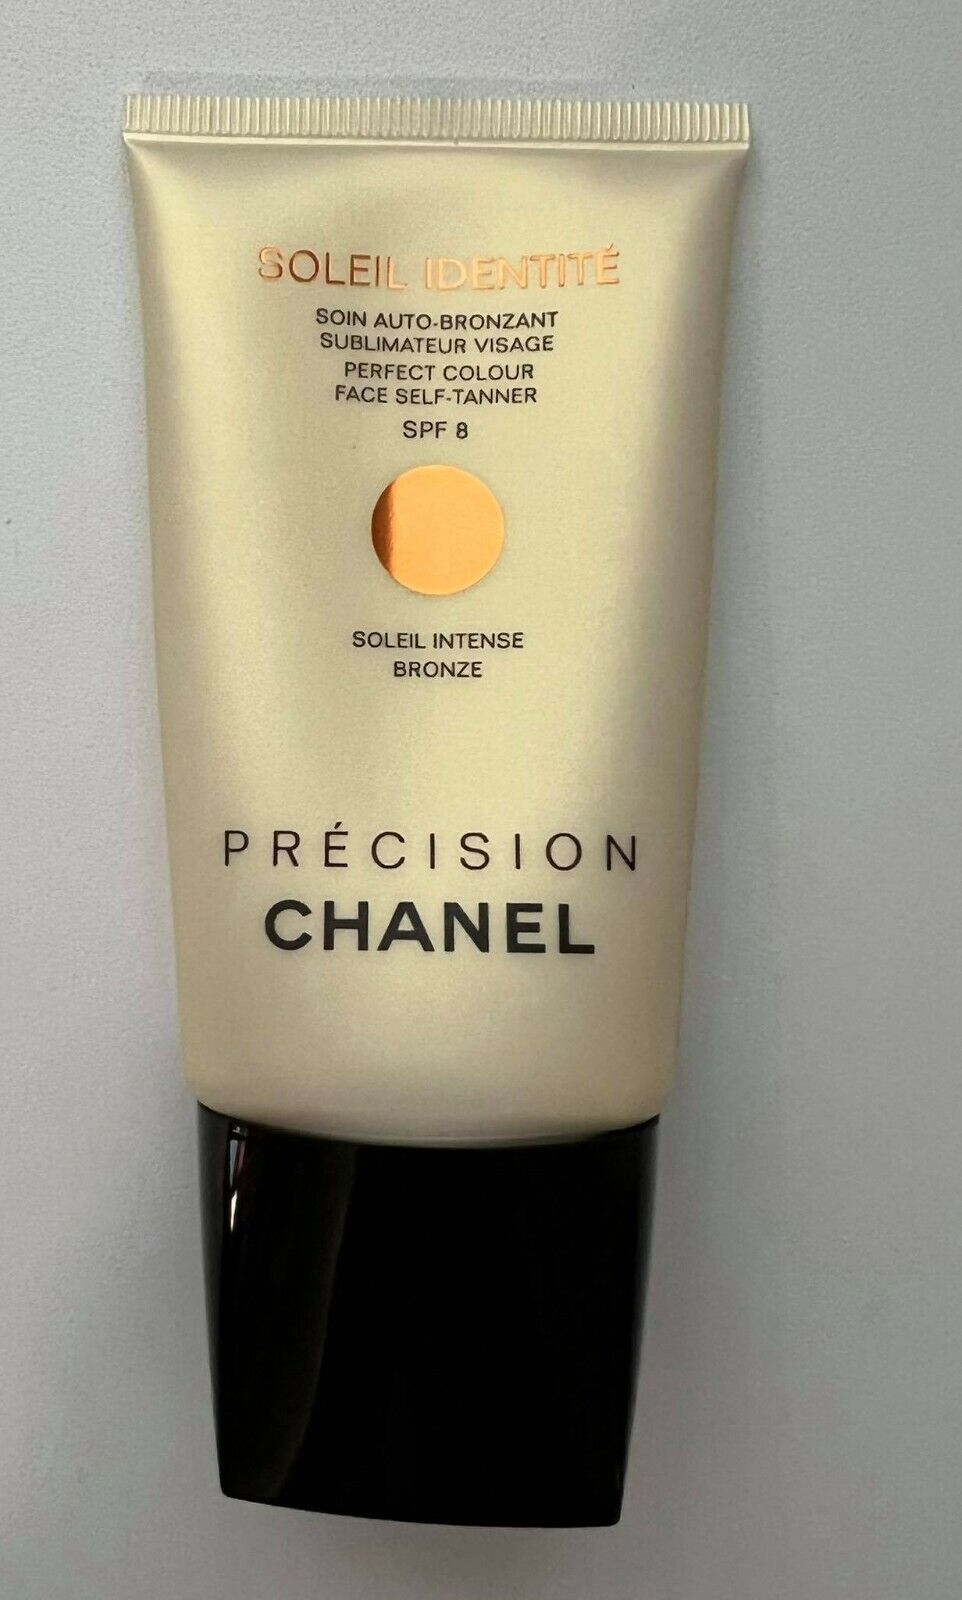 CHANEL SOLEIL INDENTITE PERFECT COLOUR FACE SELF TANNER BRONZE 50 ML SPF 8 NIEUWE